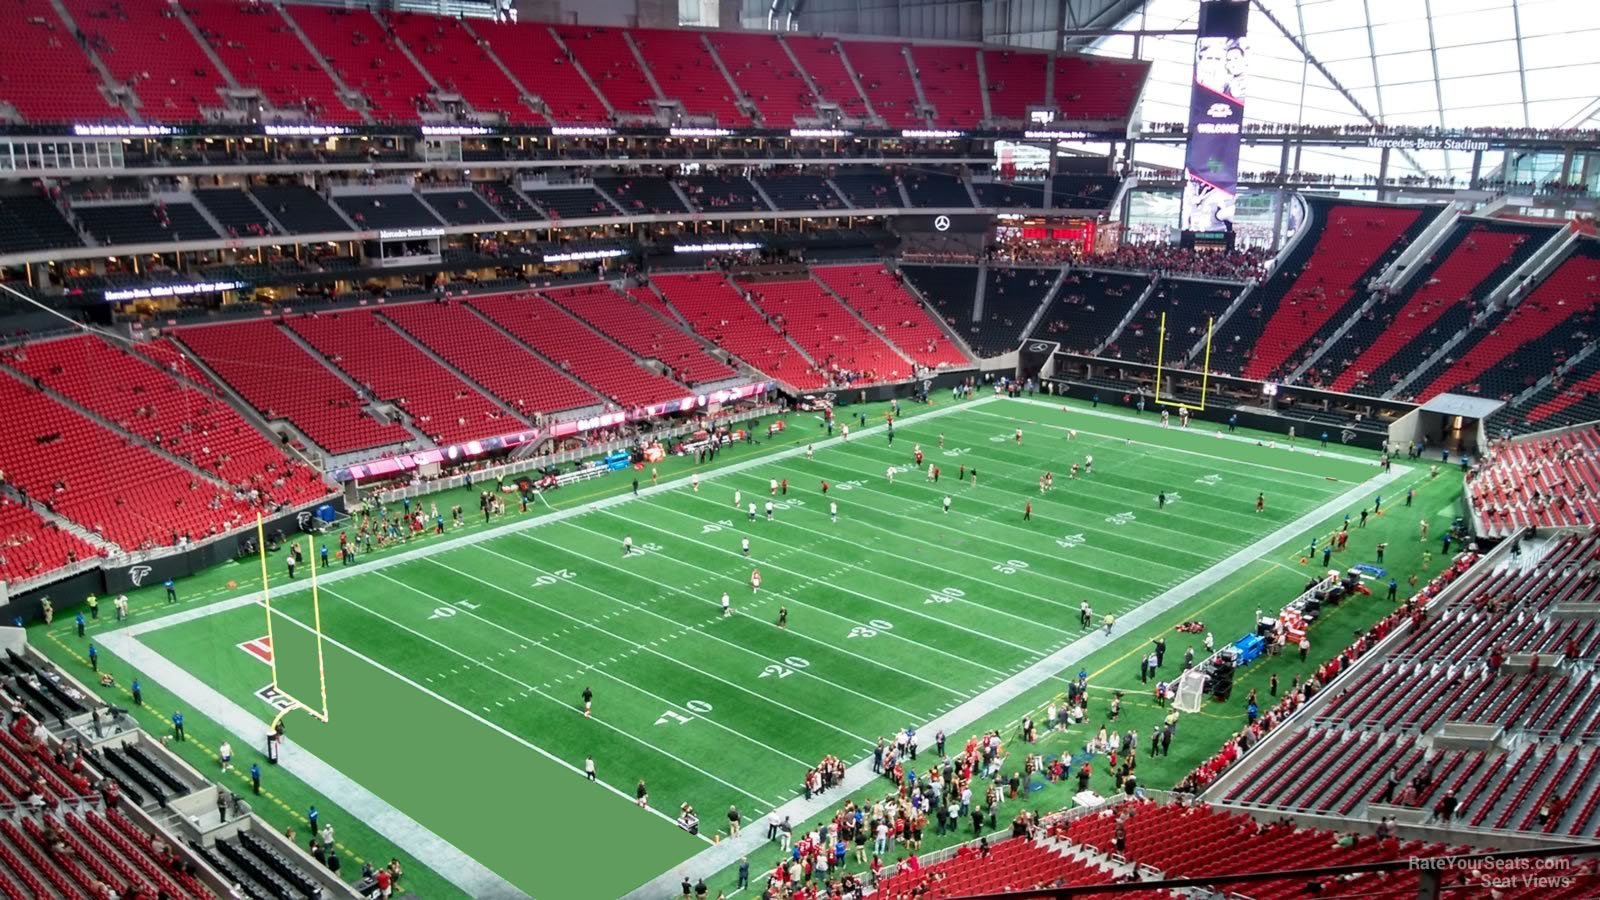 section 319, row 4 seat view  for football - mercedes-benz stadium